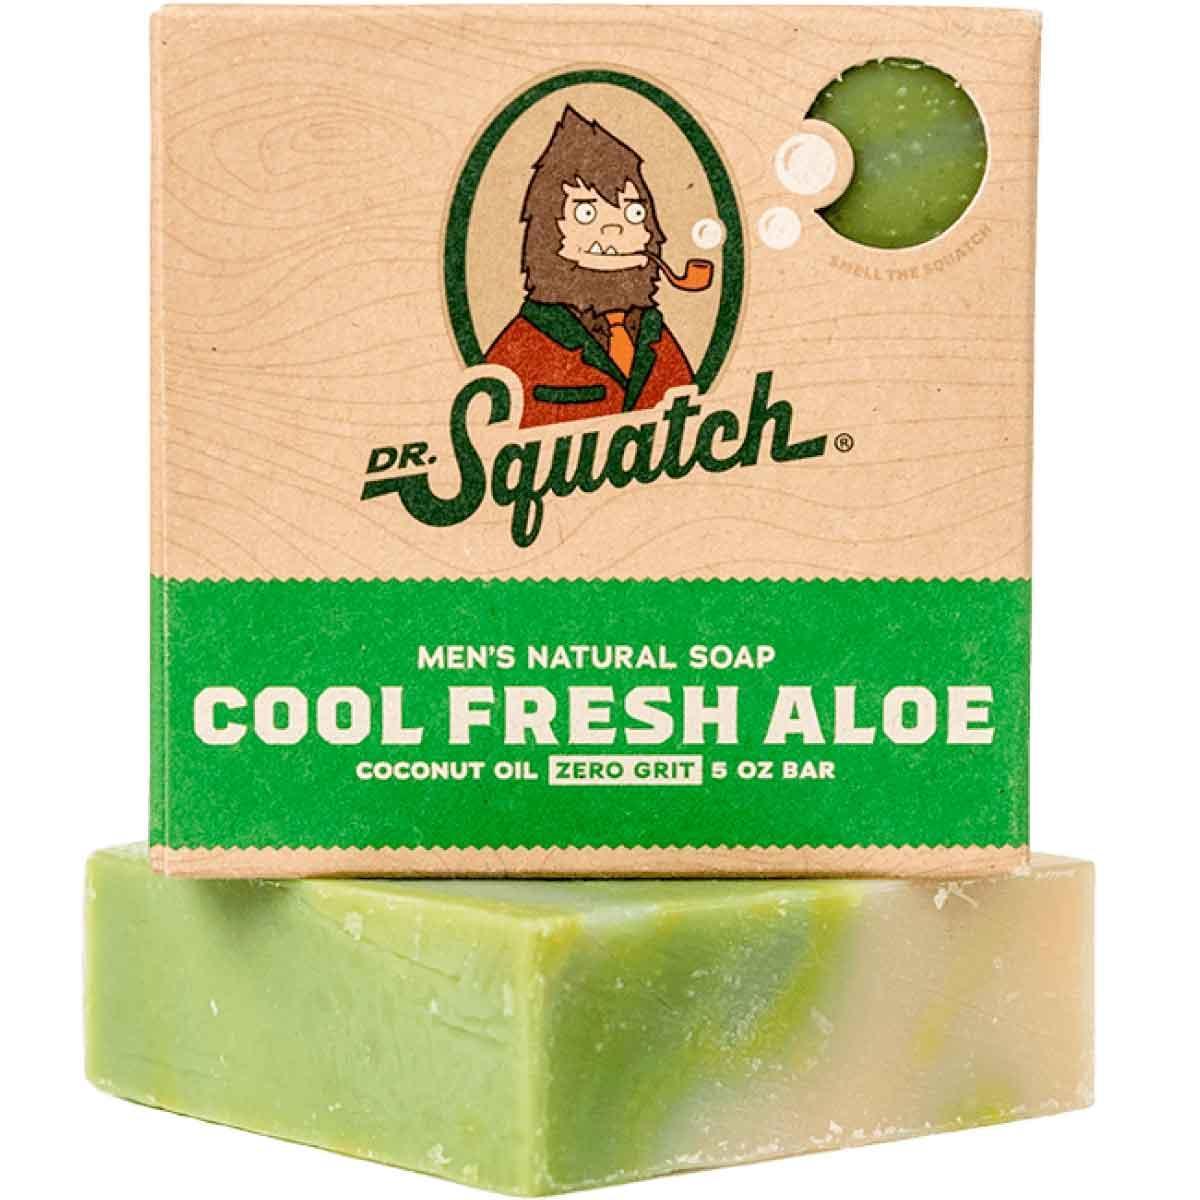 Dr. Squatch All Natural Bar Soap for Men with Heavy Grit, 3 Pack, Pine Tar